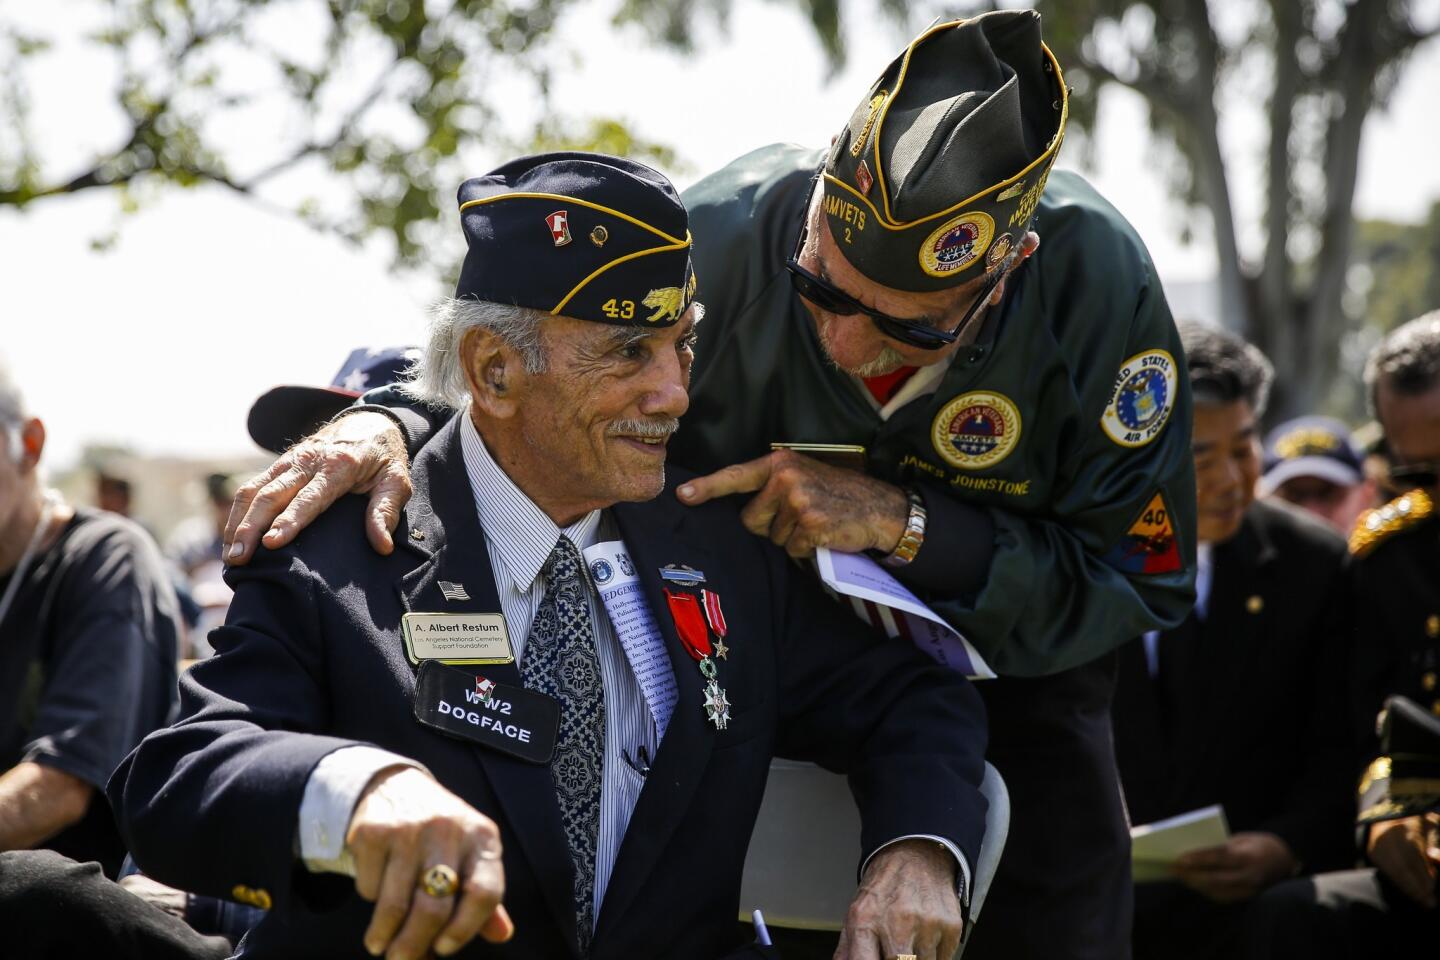 A. Albert Restum, 89, who served in the Army two years before joining the Air Force, left, talks with Air Force veteran James Johnstone, a member of the Amvets Honor Guard, before the start of a Memorial Day ceremony at Los Angeles National Cemetery.